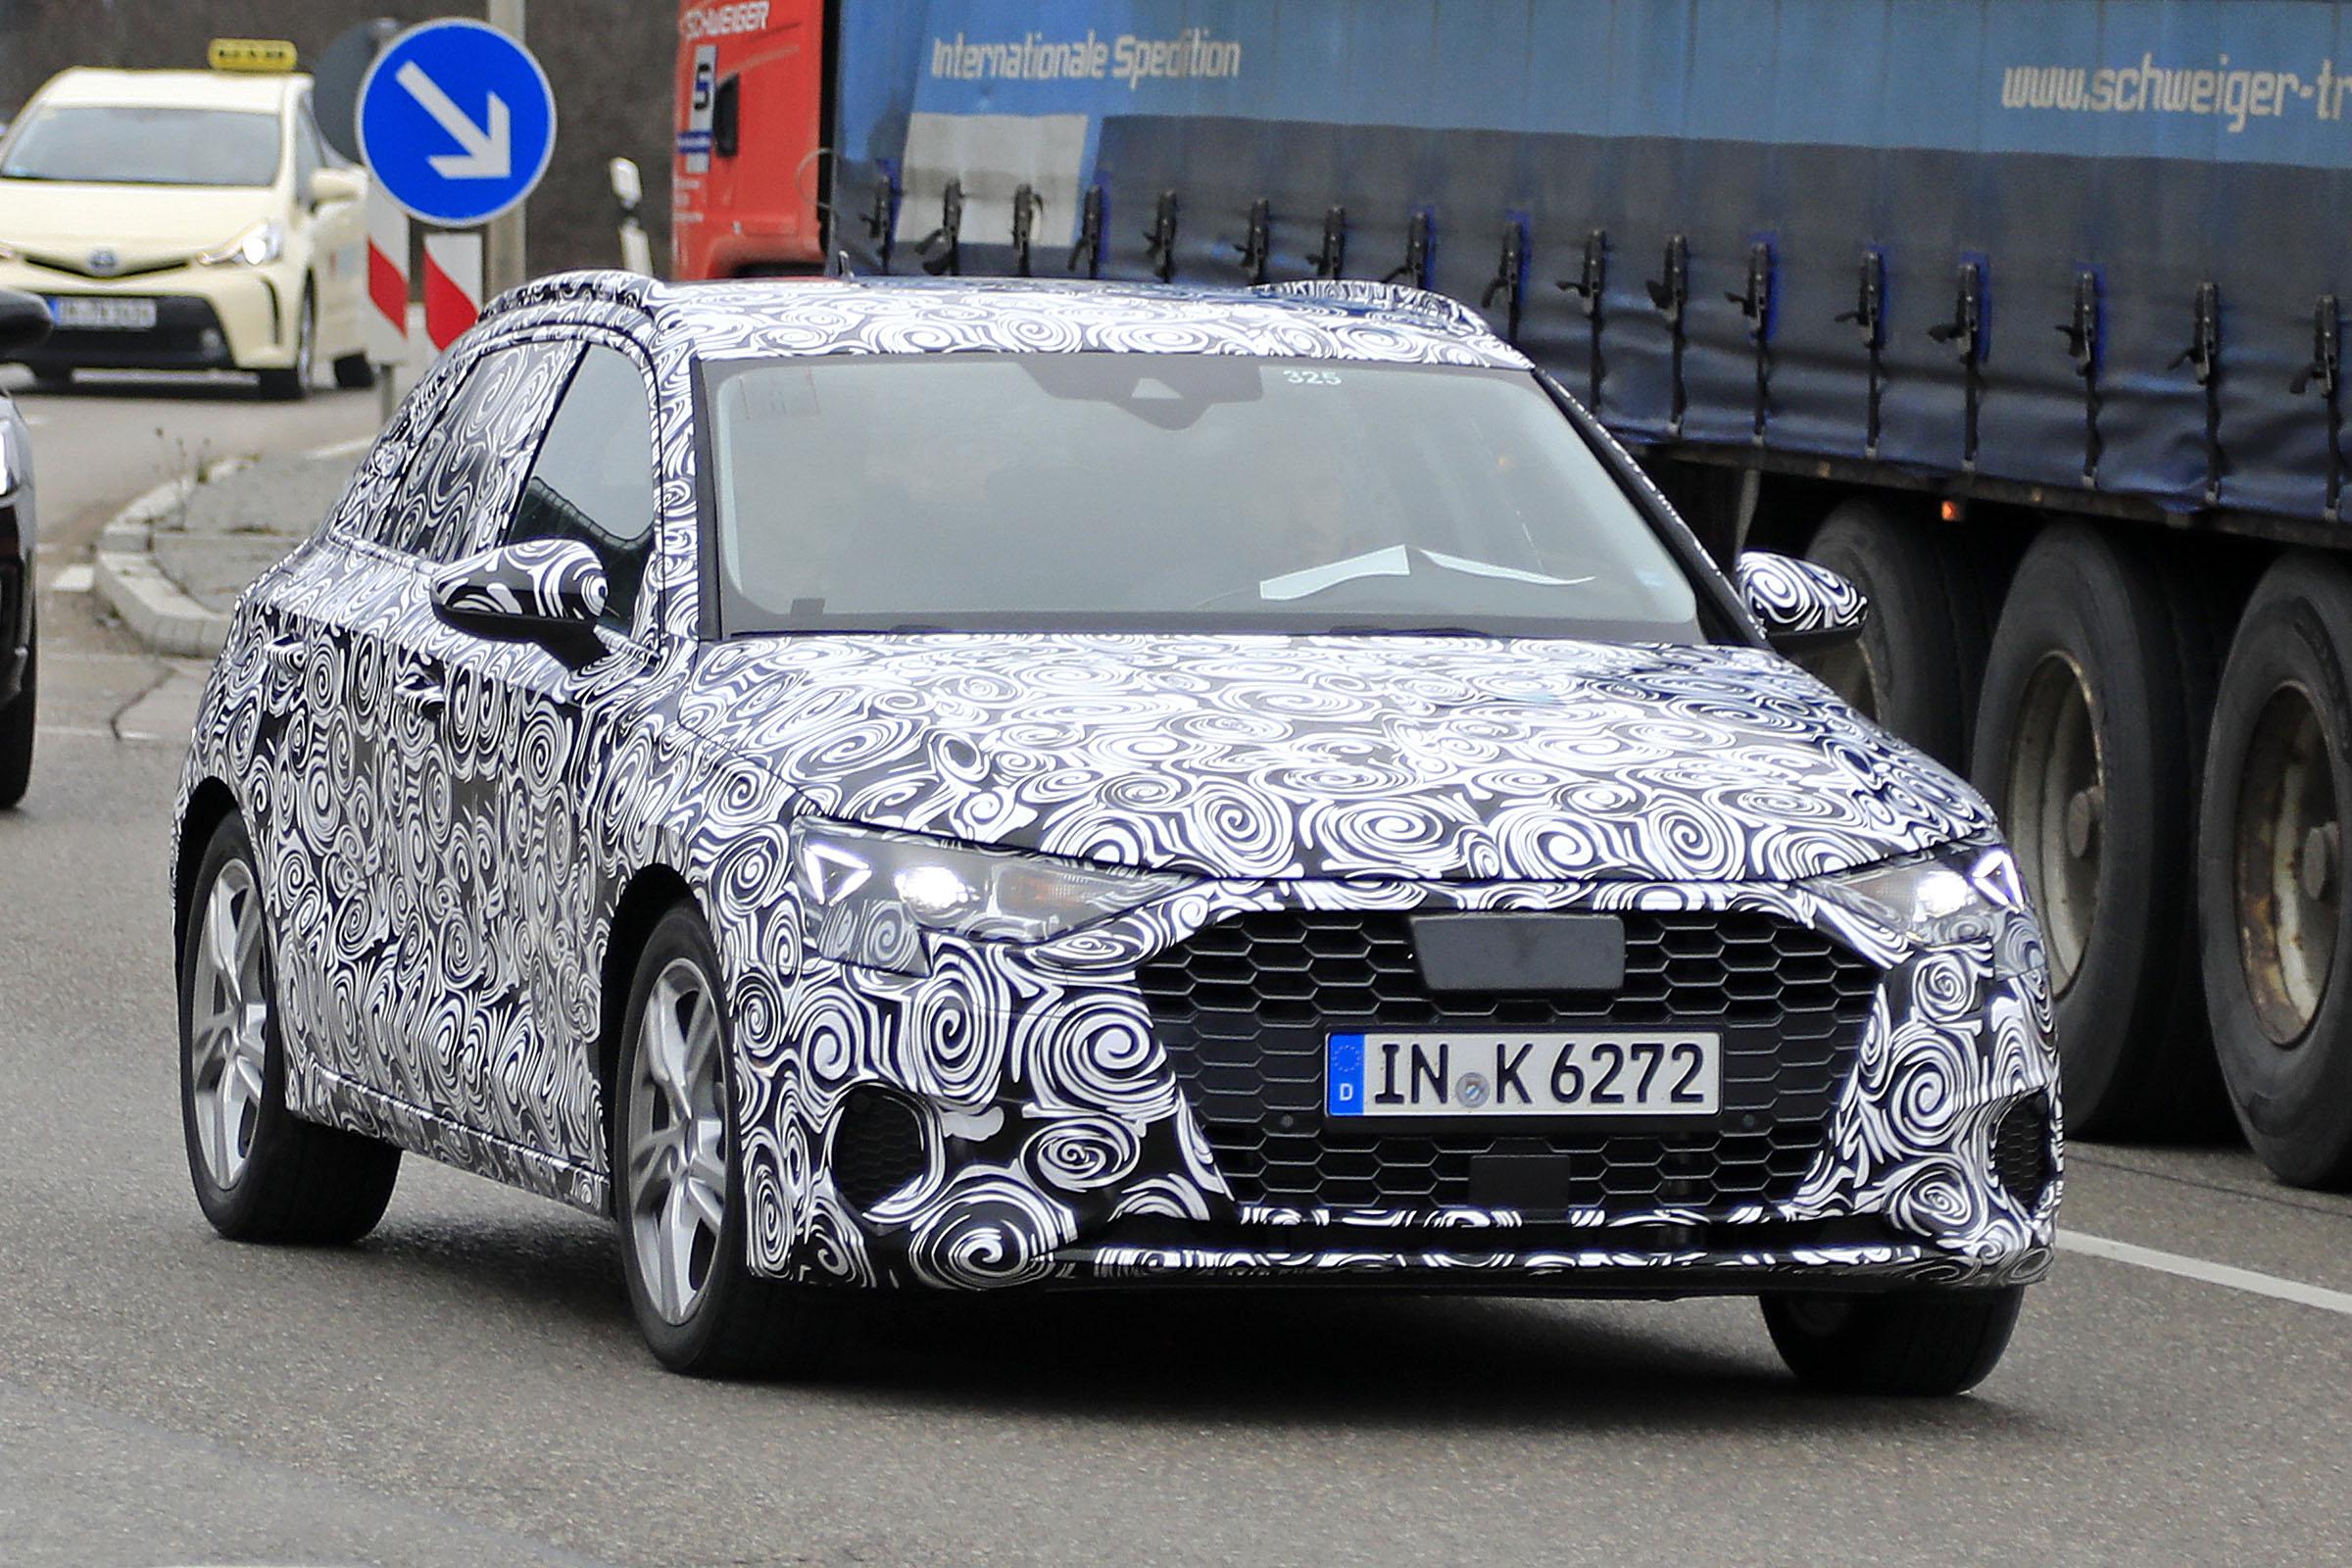 New 2019 Audi A3 spied again in sporty “S” guise. Auto